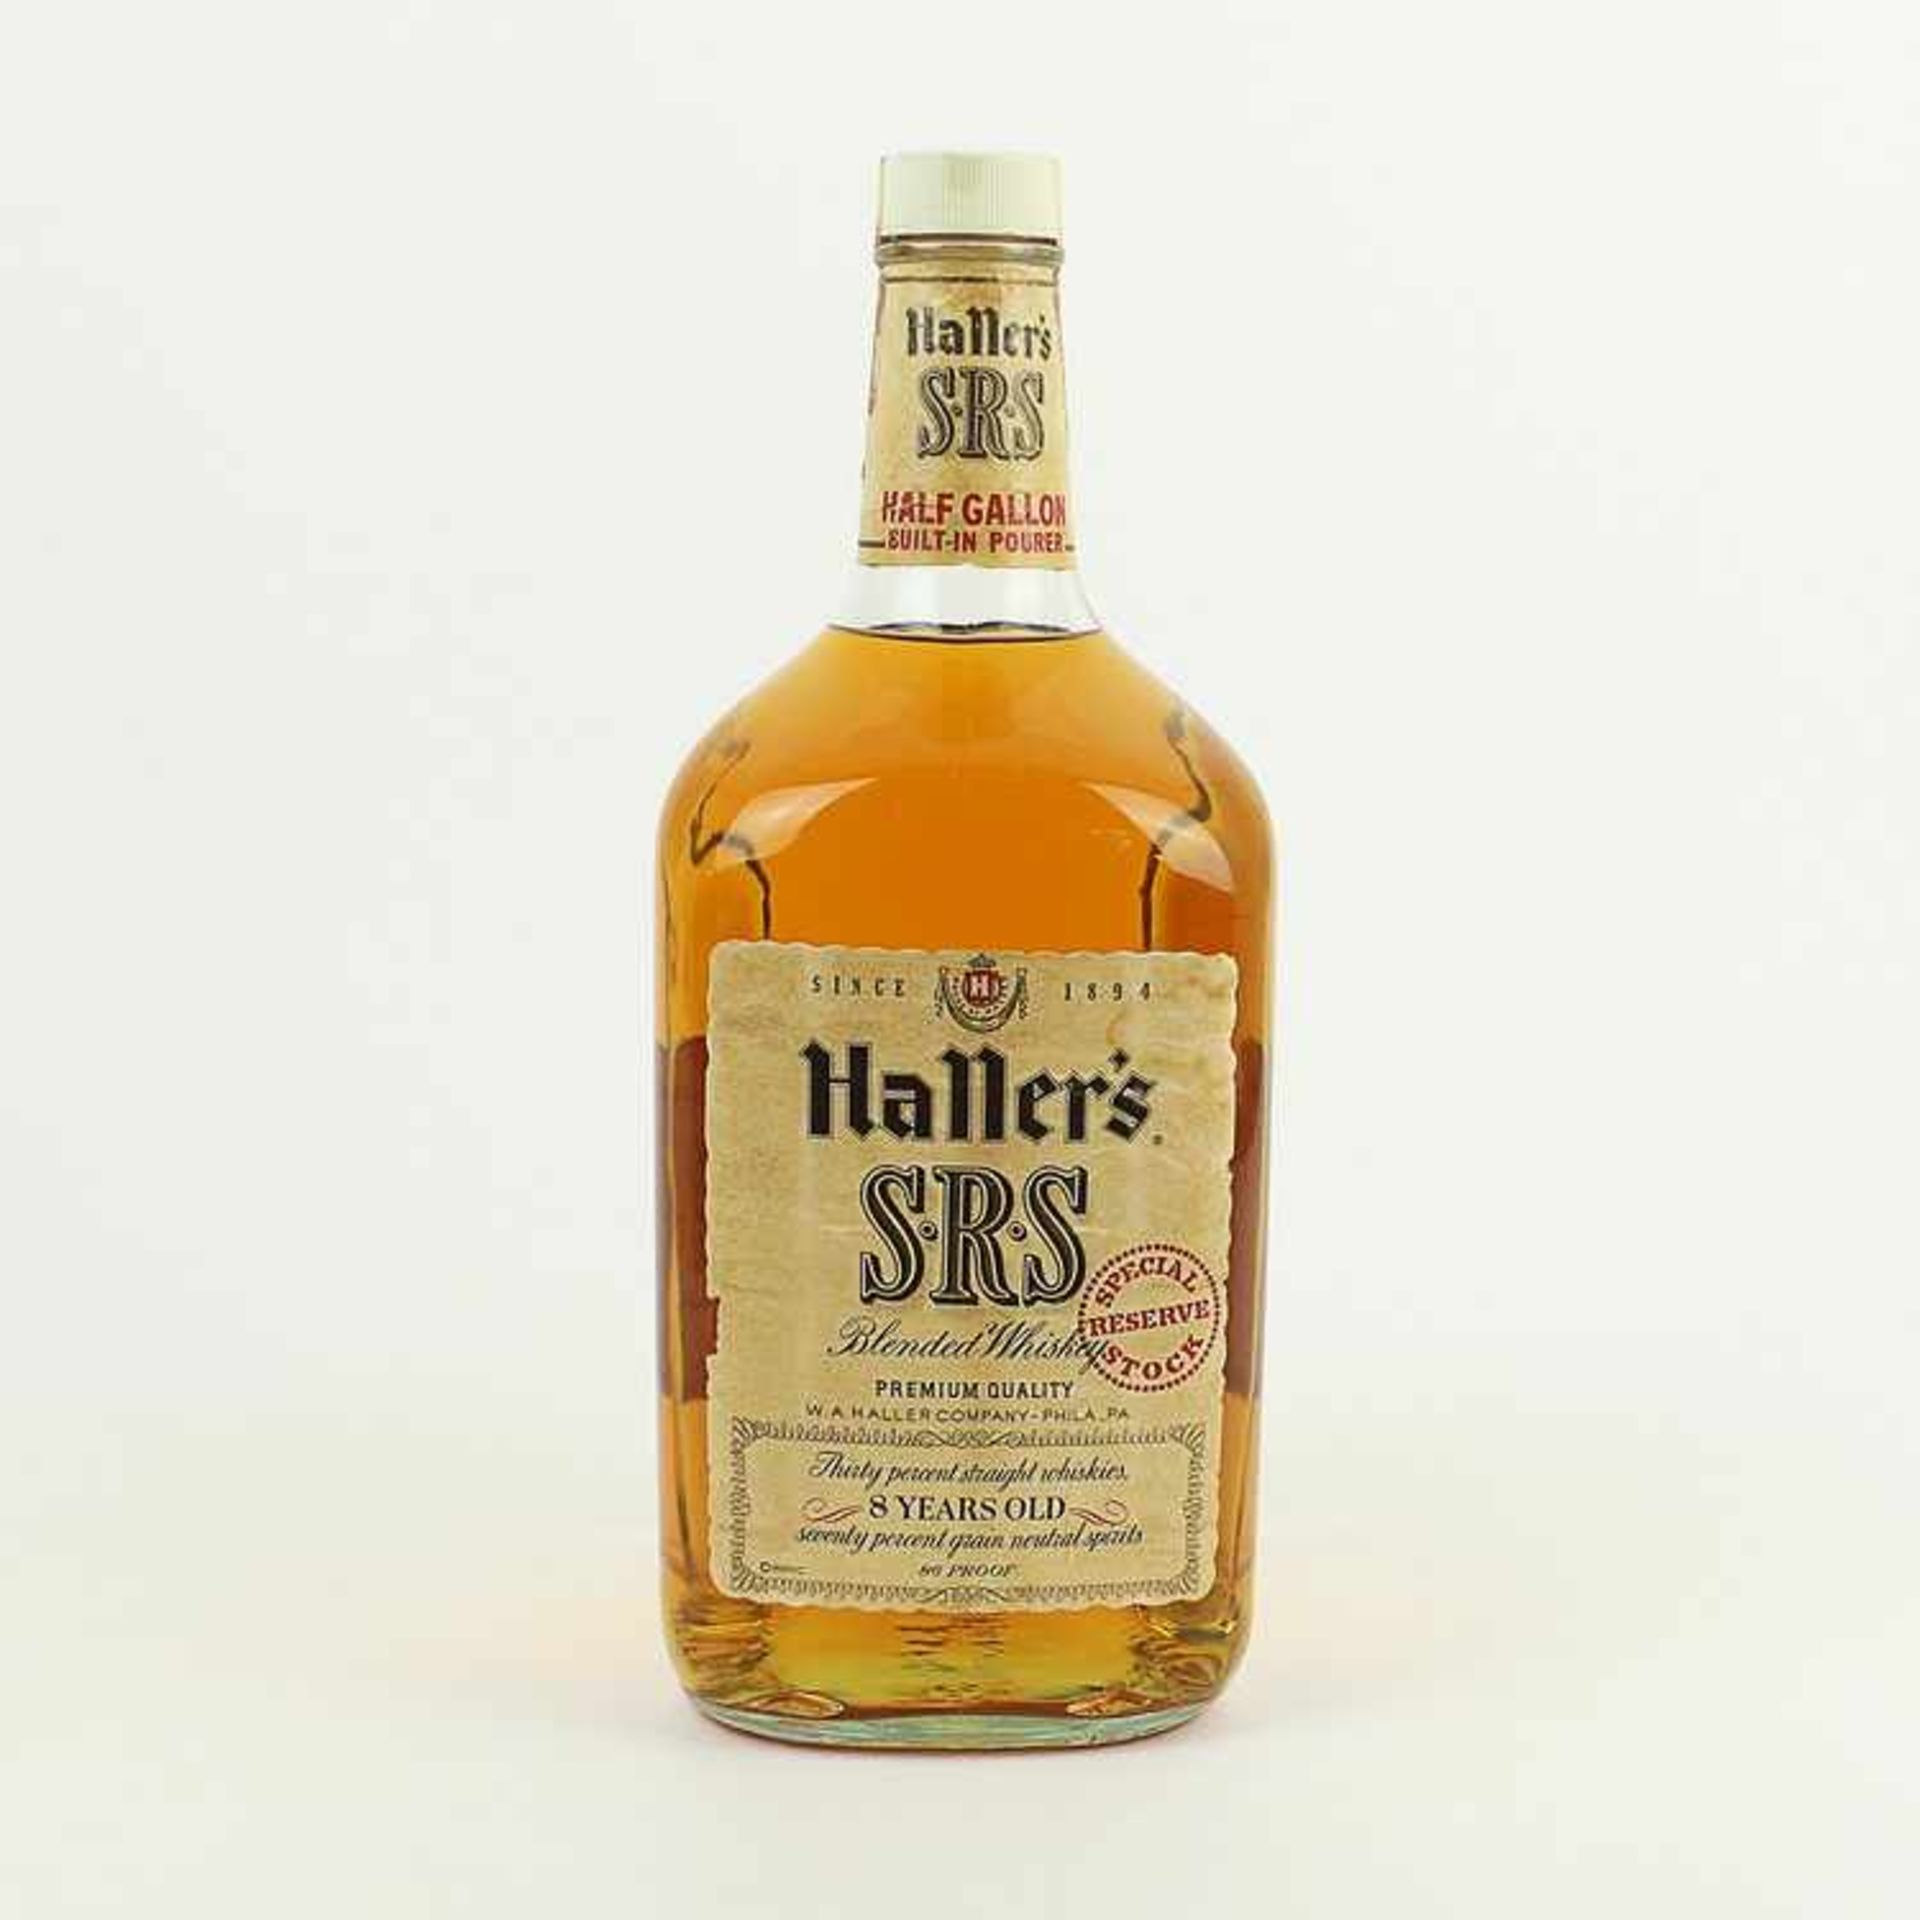 Whiskey - Haller´sältere Abfüllung, 1 Fl., Half Gallon, S.R.S Blended Whiskey, 8 Years Old, 86